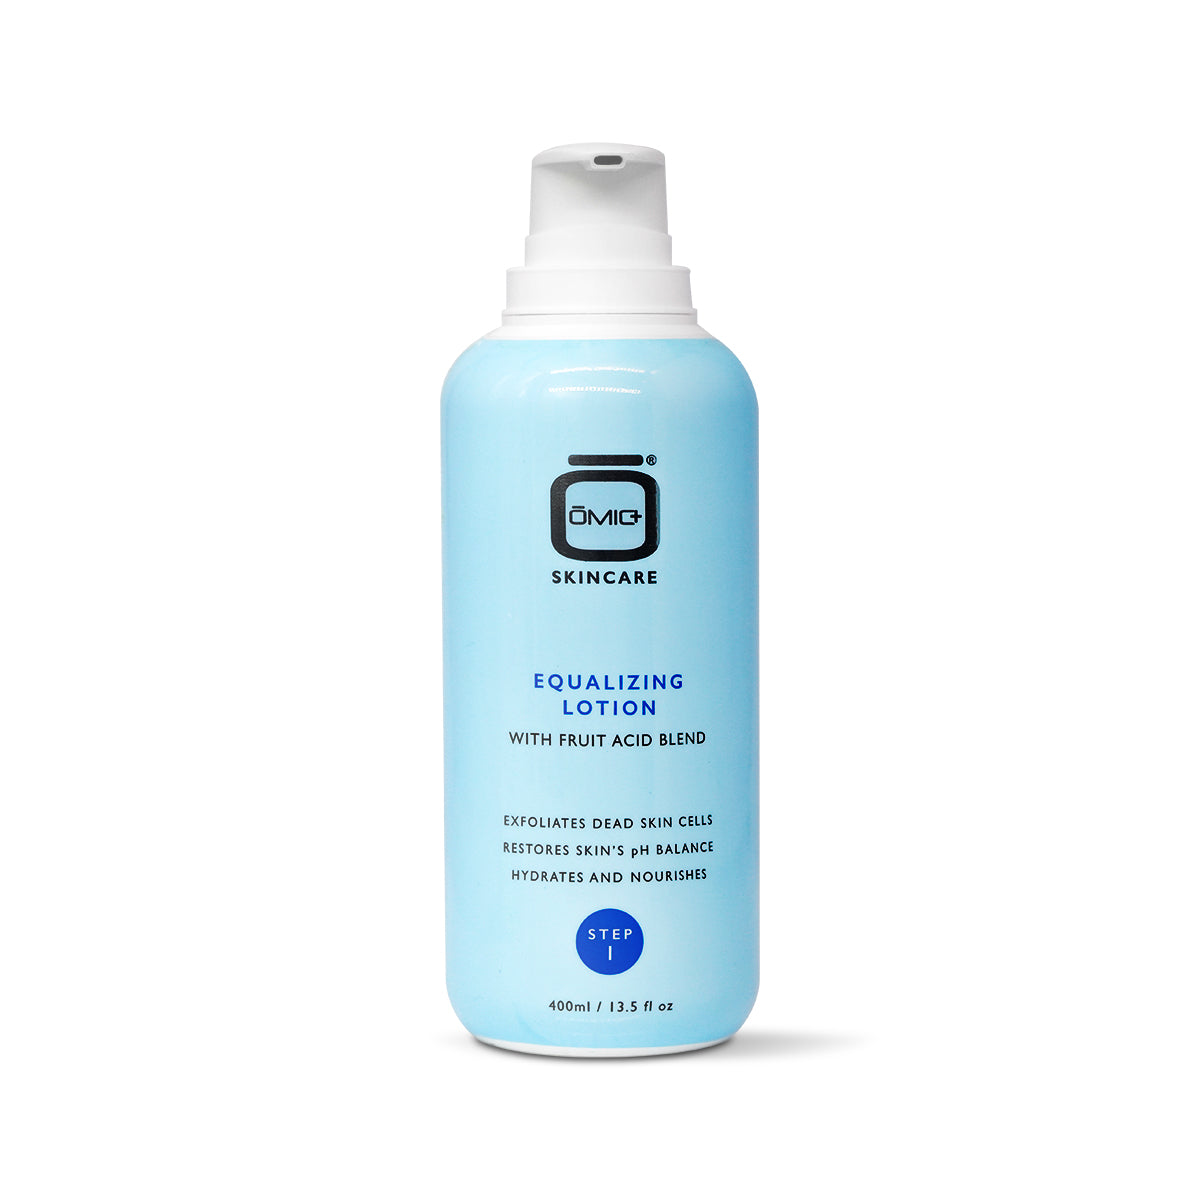 Omic+ Equilizing lotion -400ml - Step 1